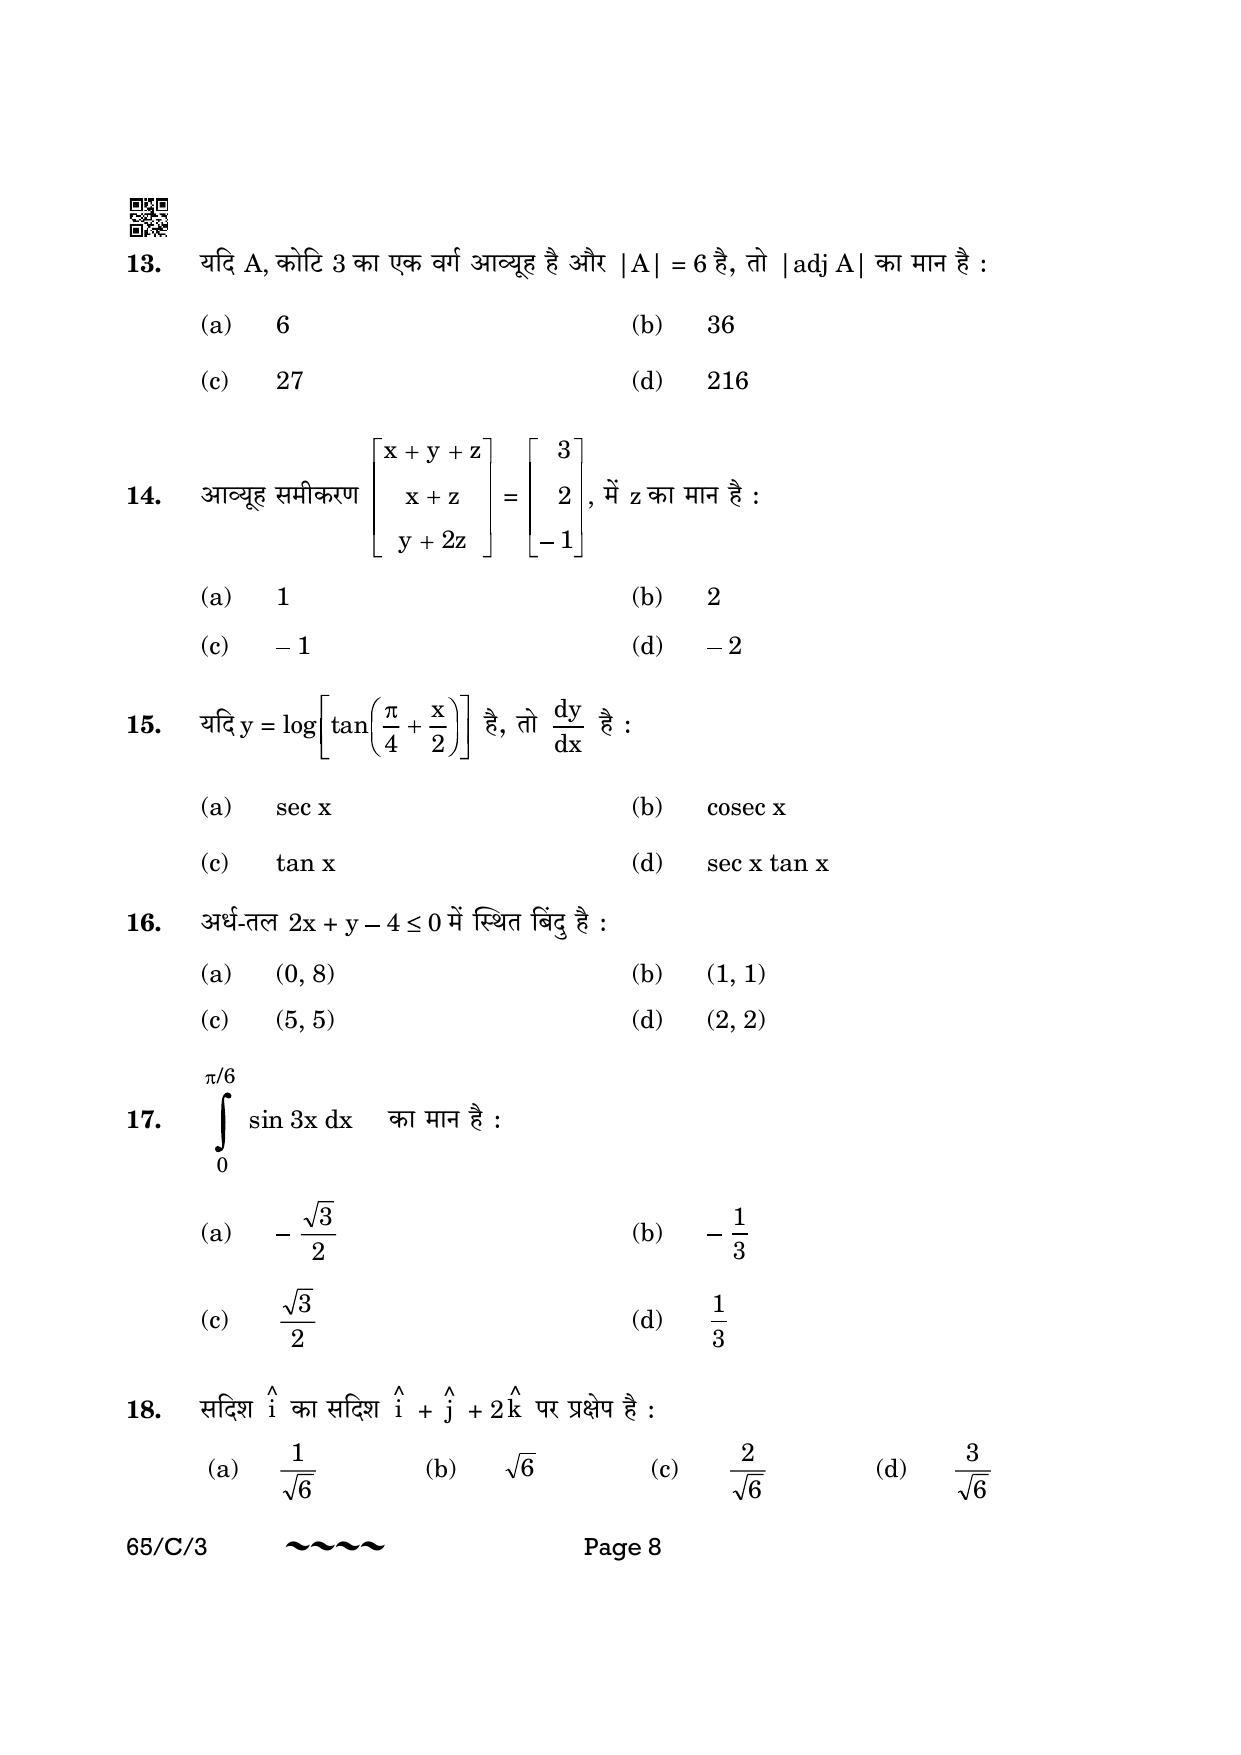 CBSE Class 12 65-3- Mathematics 2023 (Compartment) Question Paper - Page 8